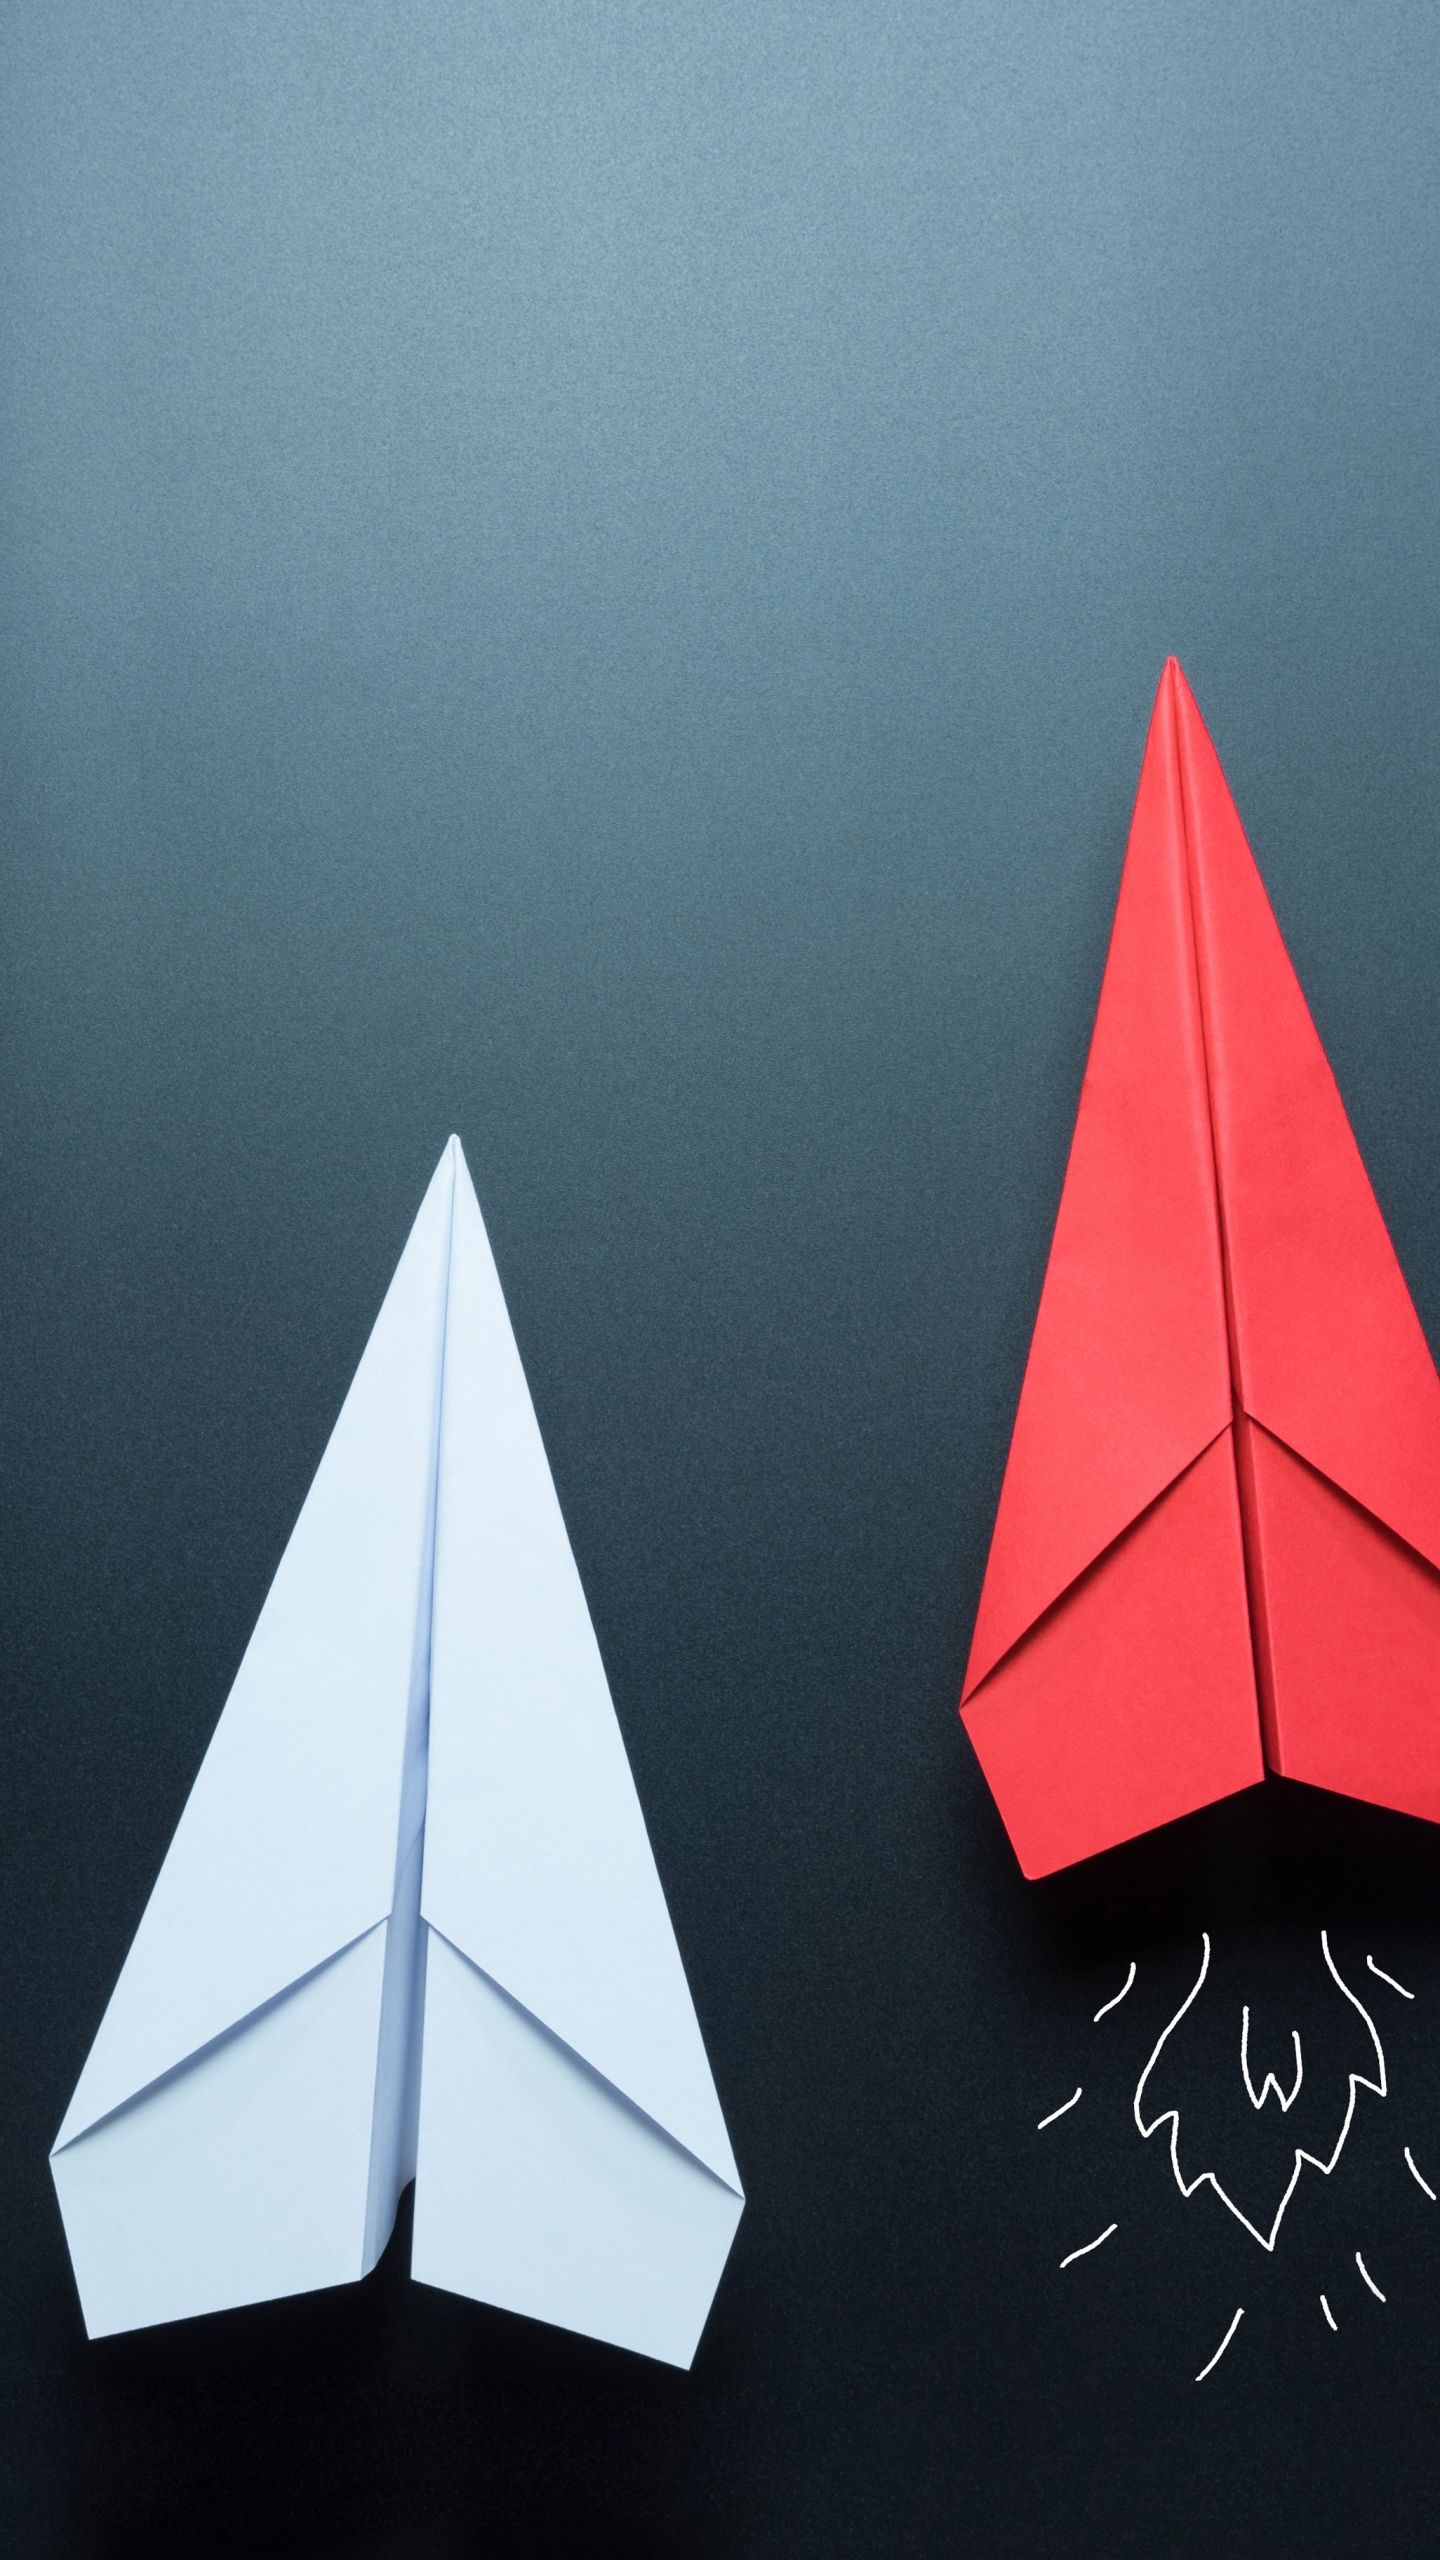 Mobile wallpaper: Paper, Origami, Paper Plane, Man Made, 1295758 download  the picture for free.